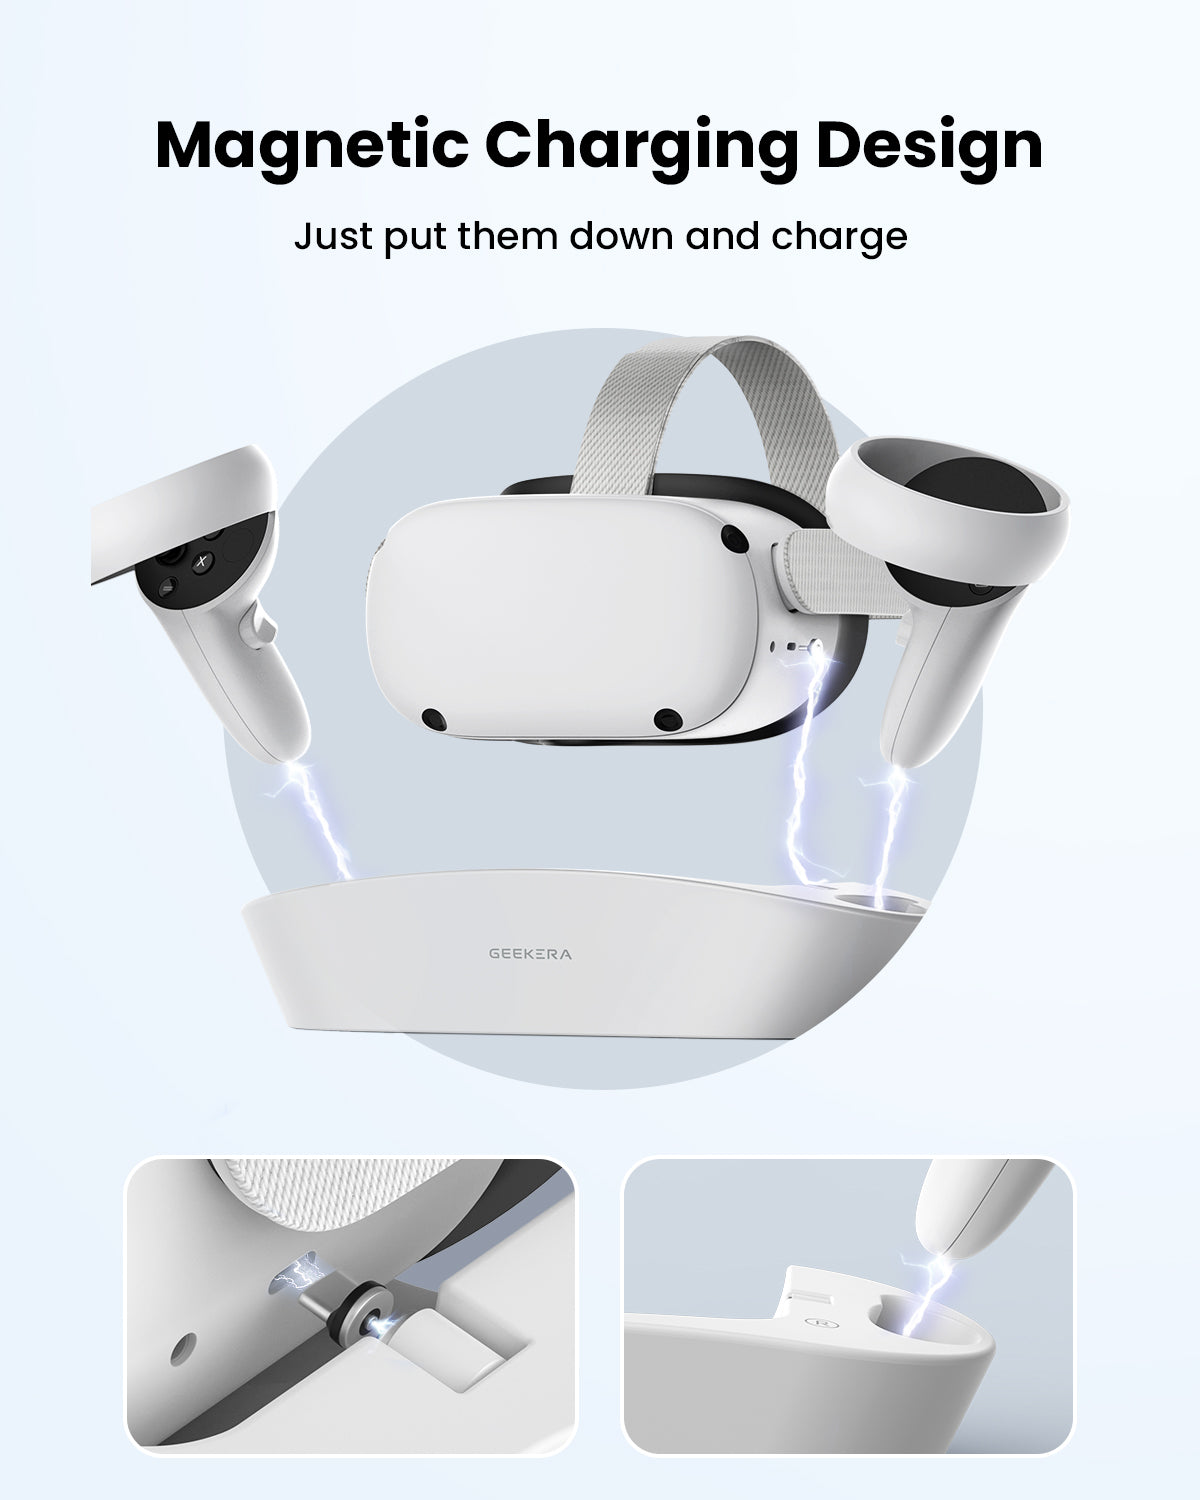 GEEKERA Charging Dock for Oculus Quest 2, Magnetic Charging Station for Meta Quest 2